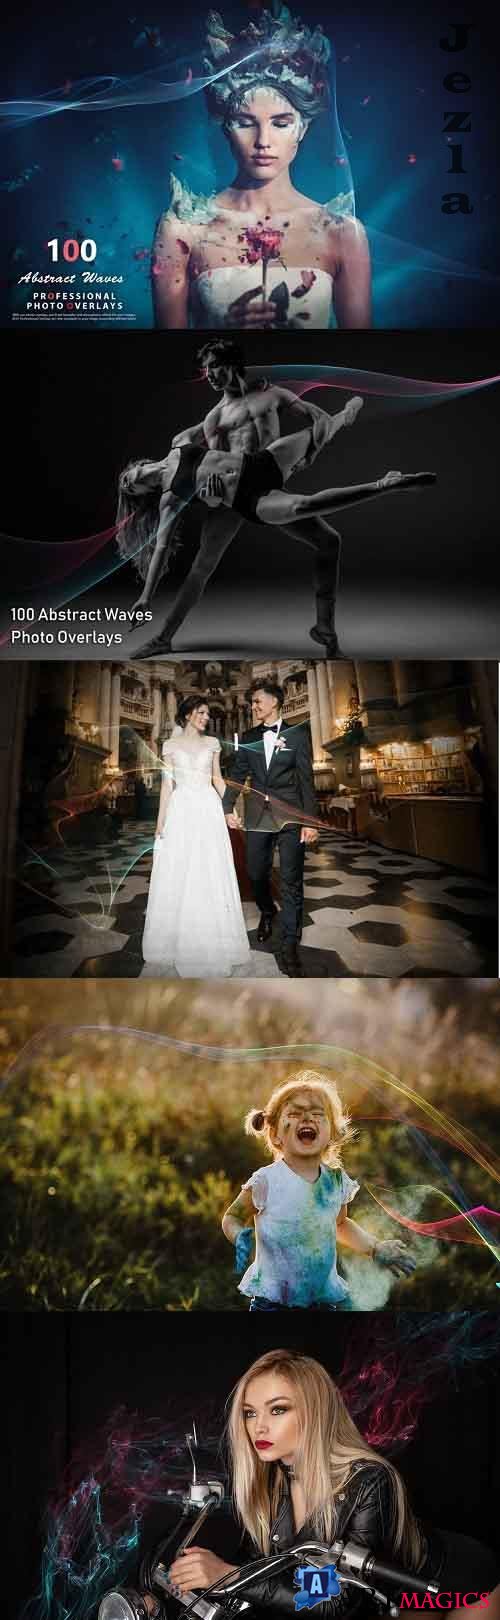 100 Abstract Waves Photo Overlays - 992746